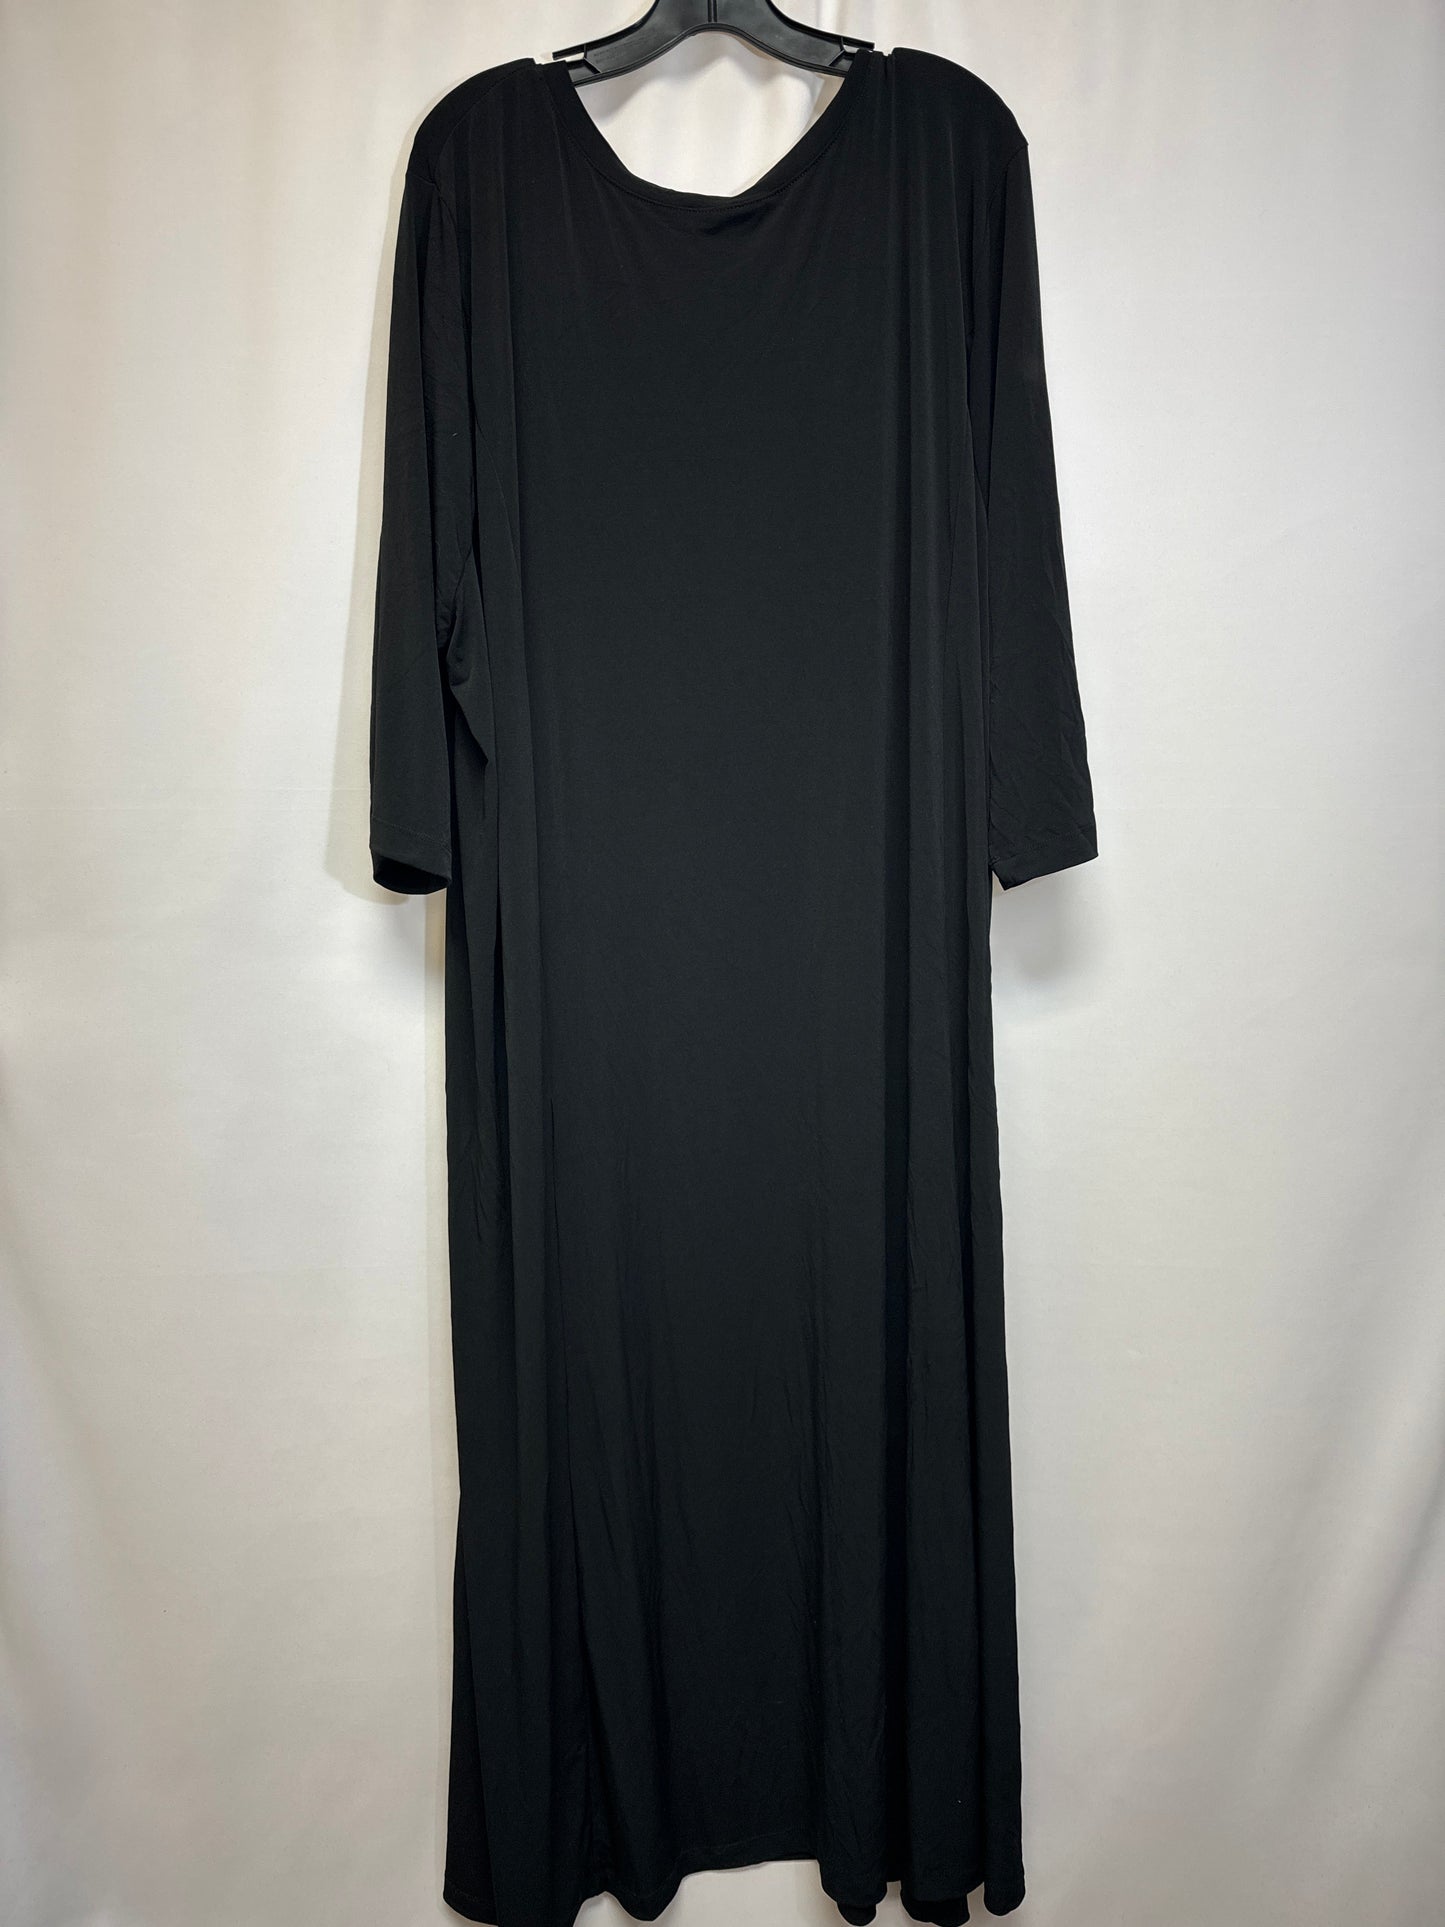 Dress Casual Maxi By Woman Within  Size: 3x